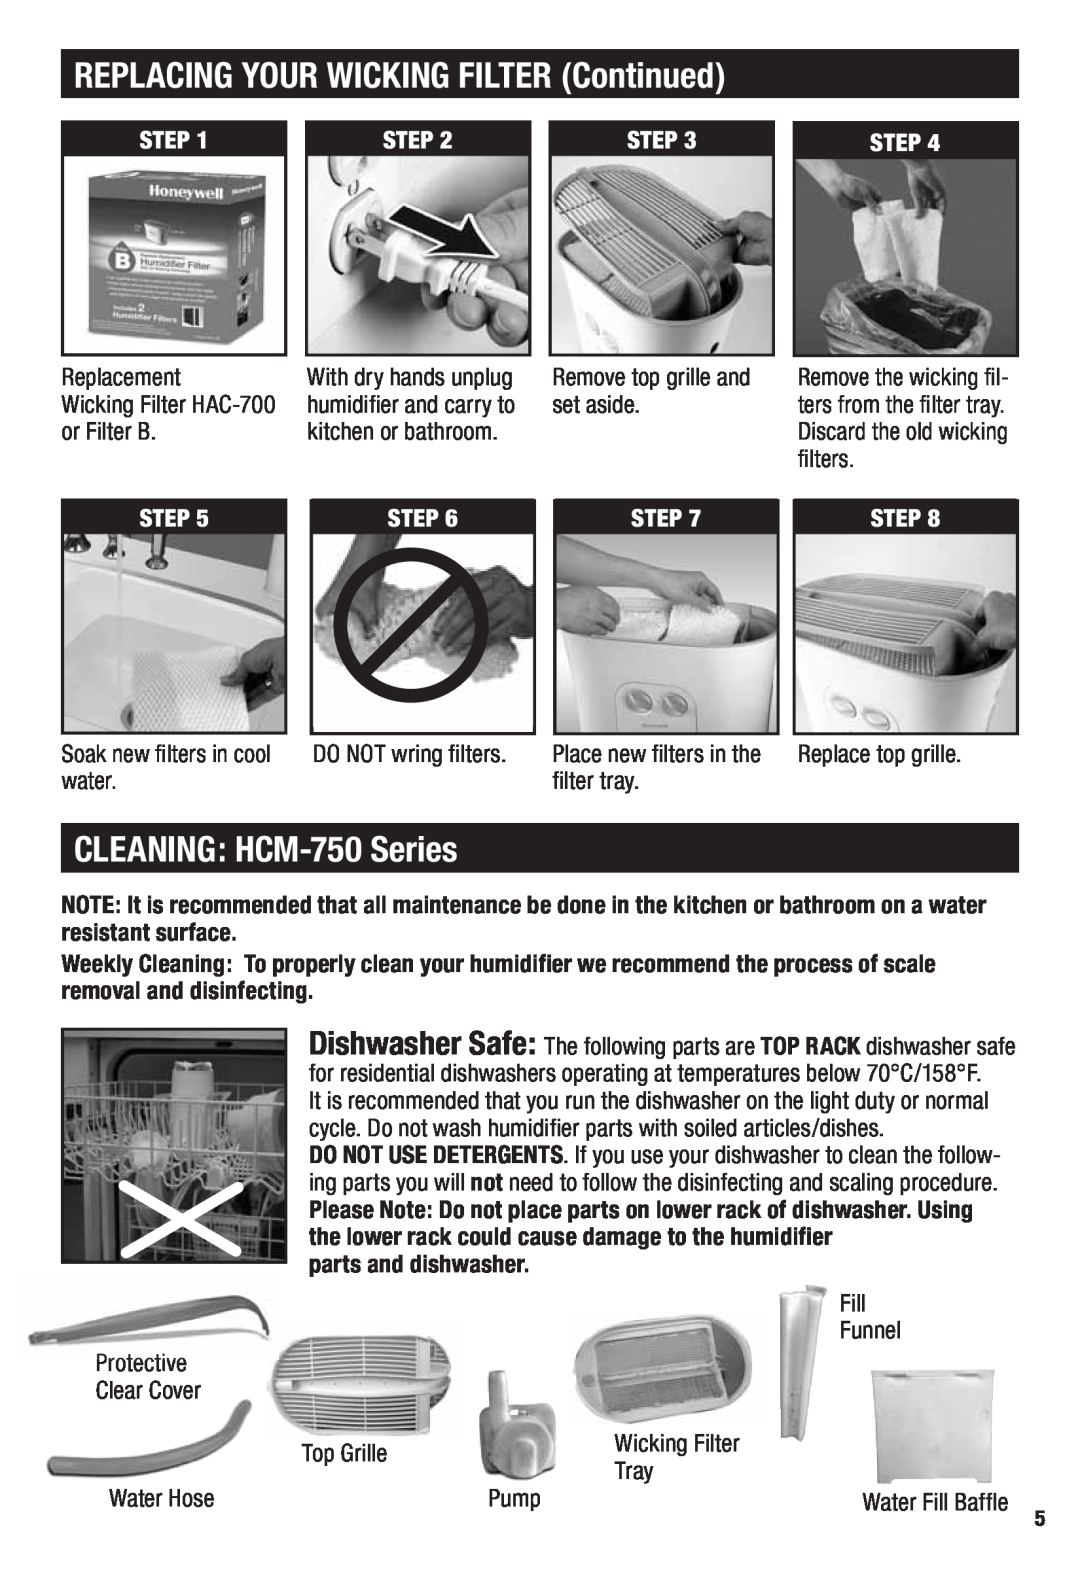 Honeywell important safety instructions REPLACING YOUR WICKING FILTER Continued, CLEANING HCM-750Series, Step 